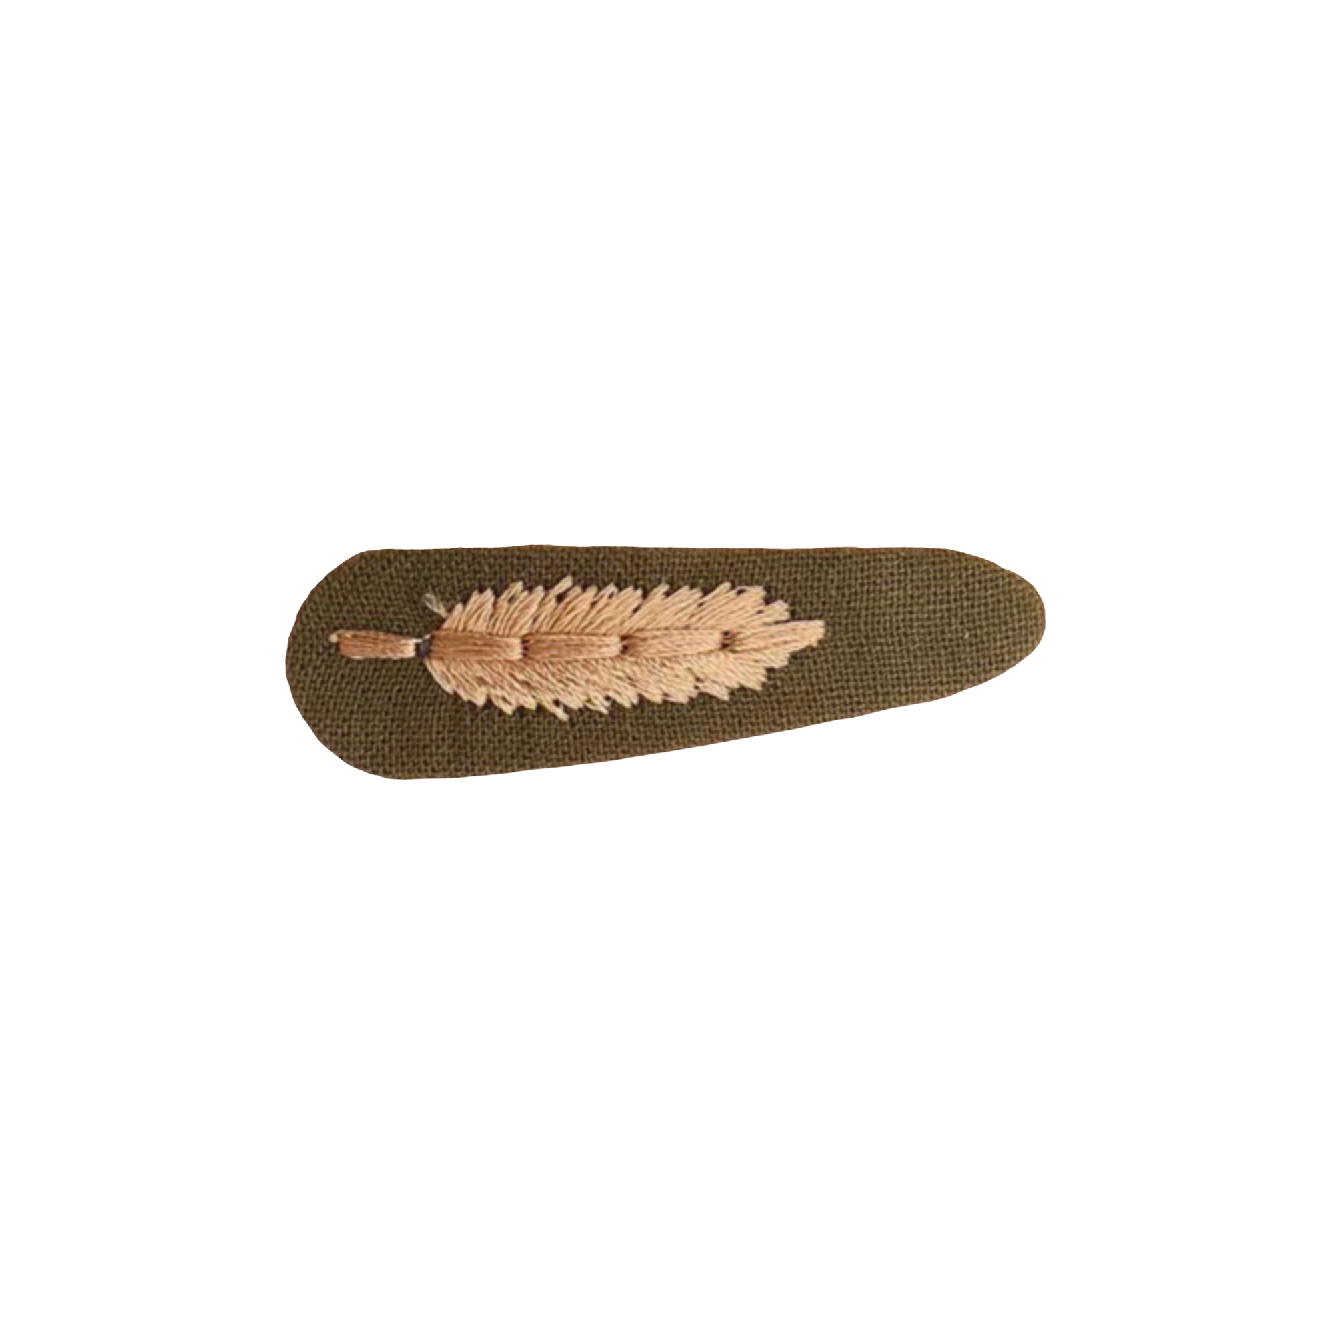 'Embroidered Flower' Hair Clip in Olive